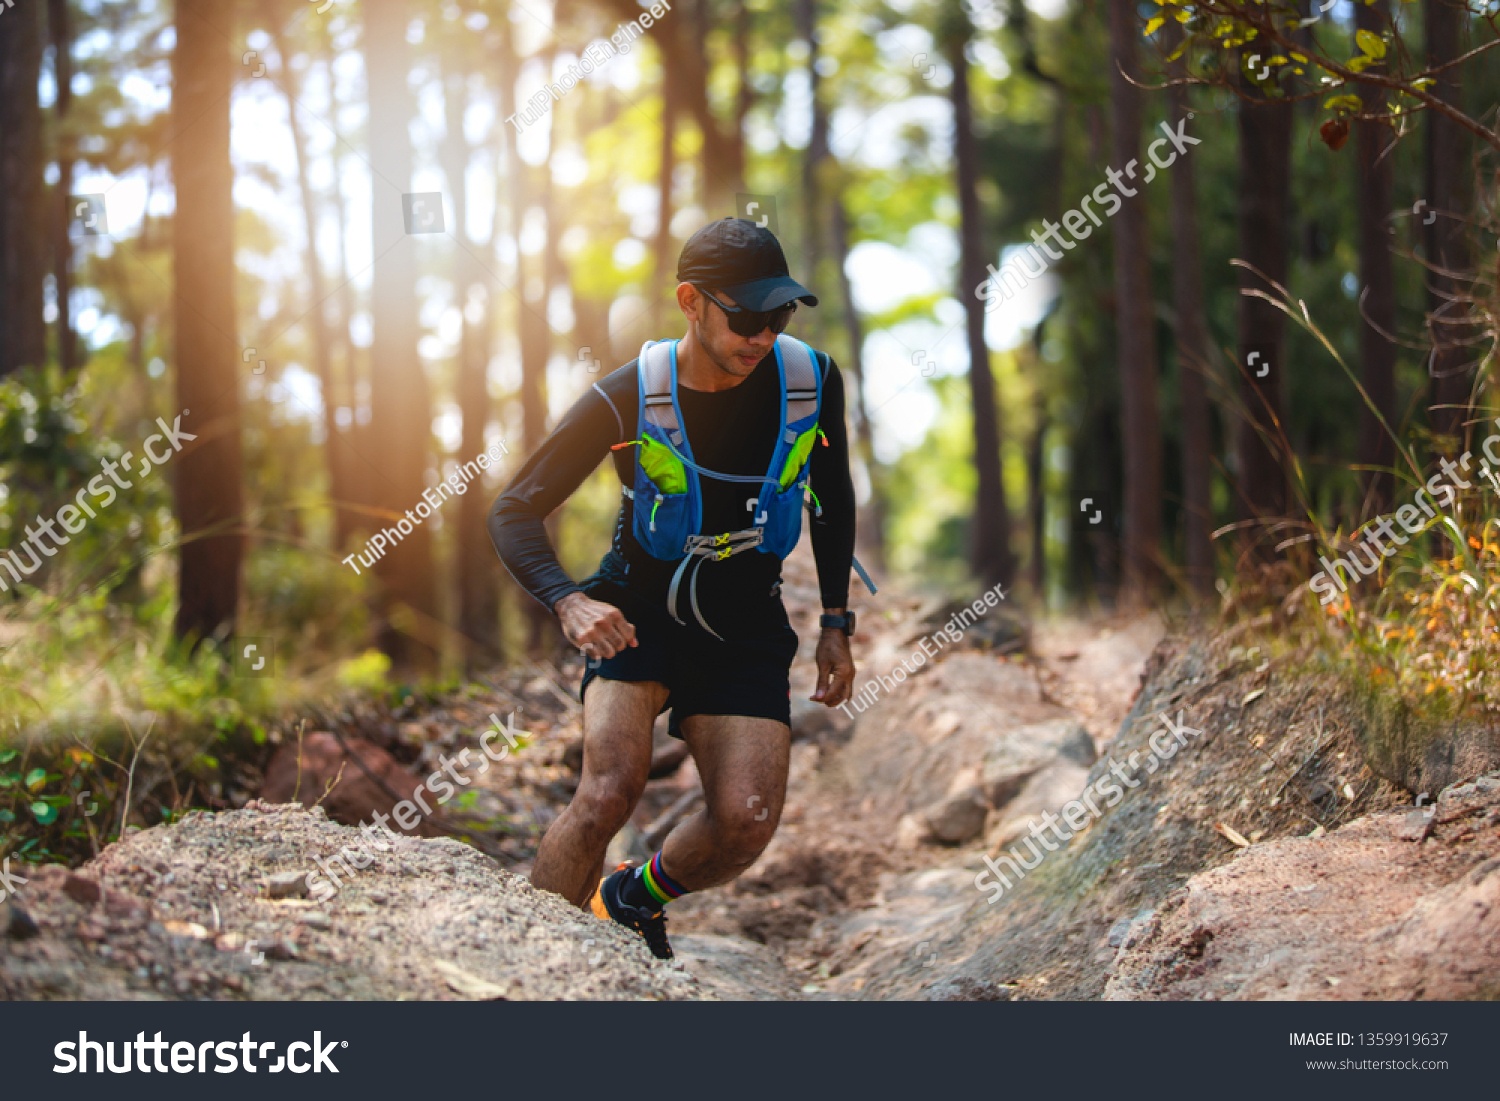 A man Runner of Trail . and athlete's feet wearing sports shoes for trail running in the forest #1359919637